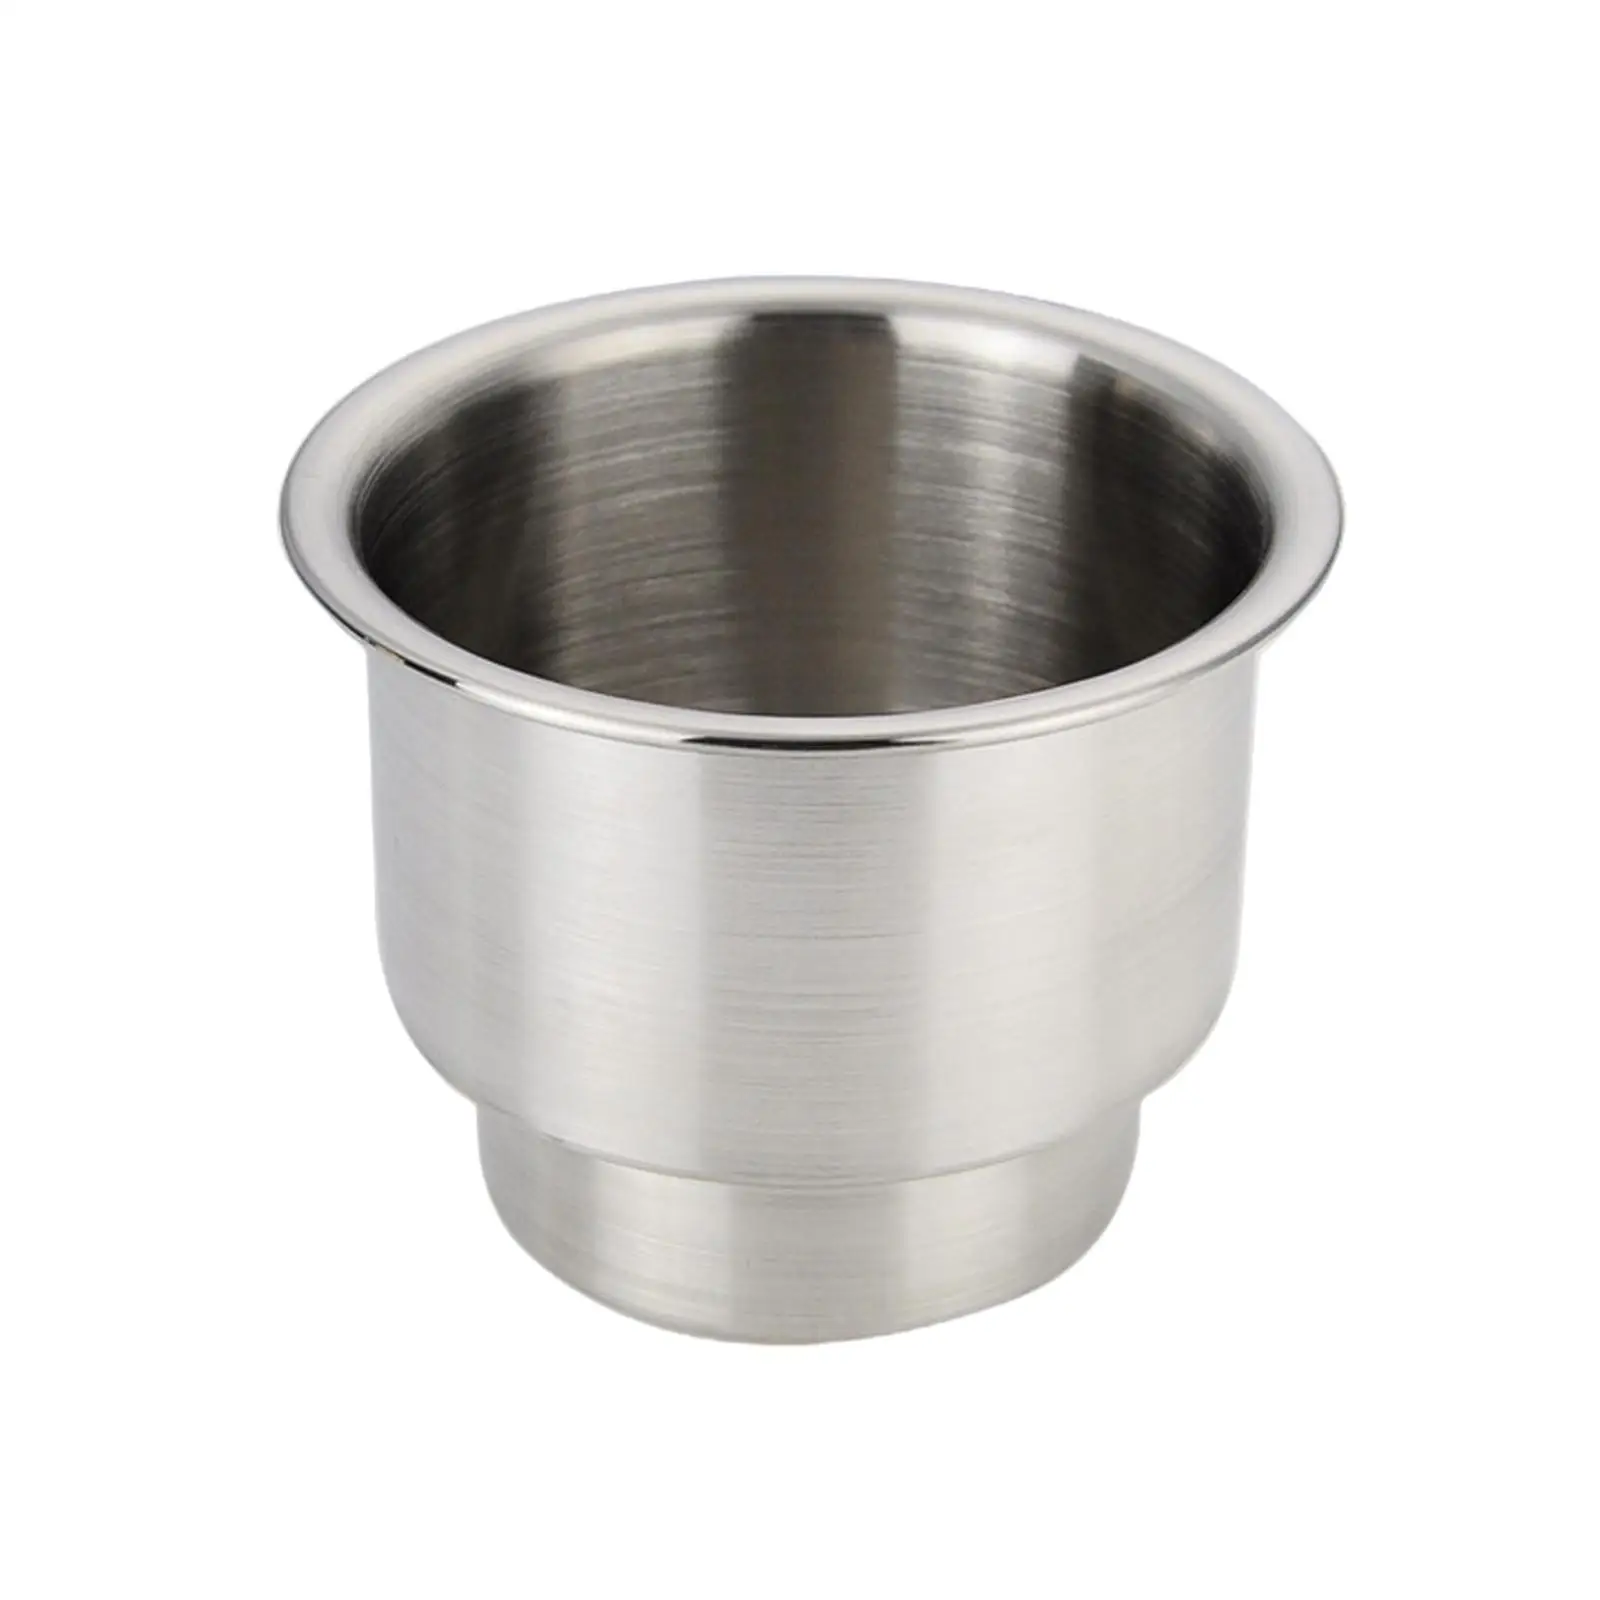 Cup Drink Holder Stainless Steel Recessed Drink Water Bottle Holder for Car Truck Boat RV Silver Color Car Accessories